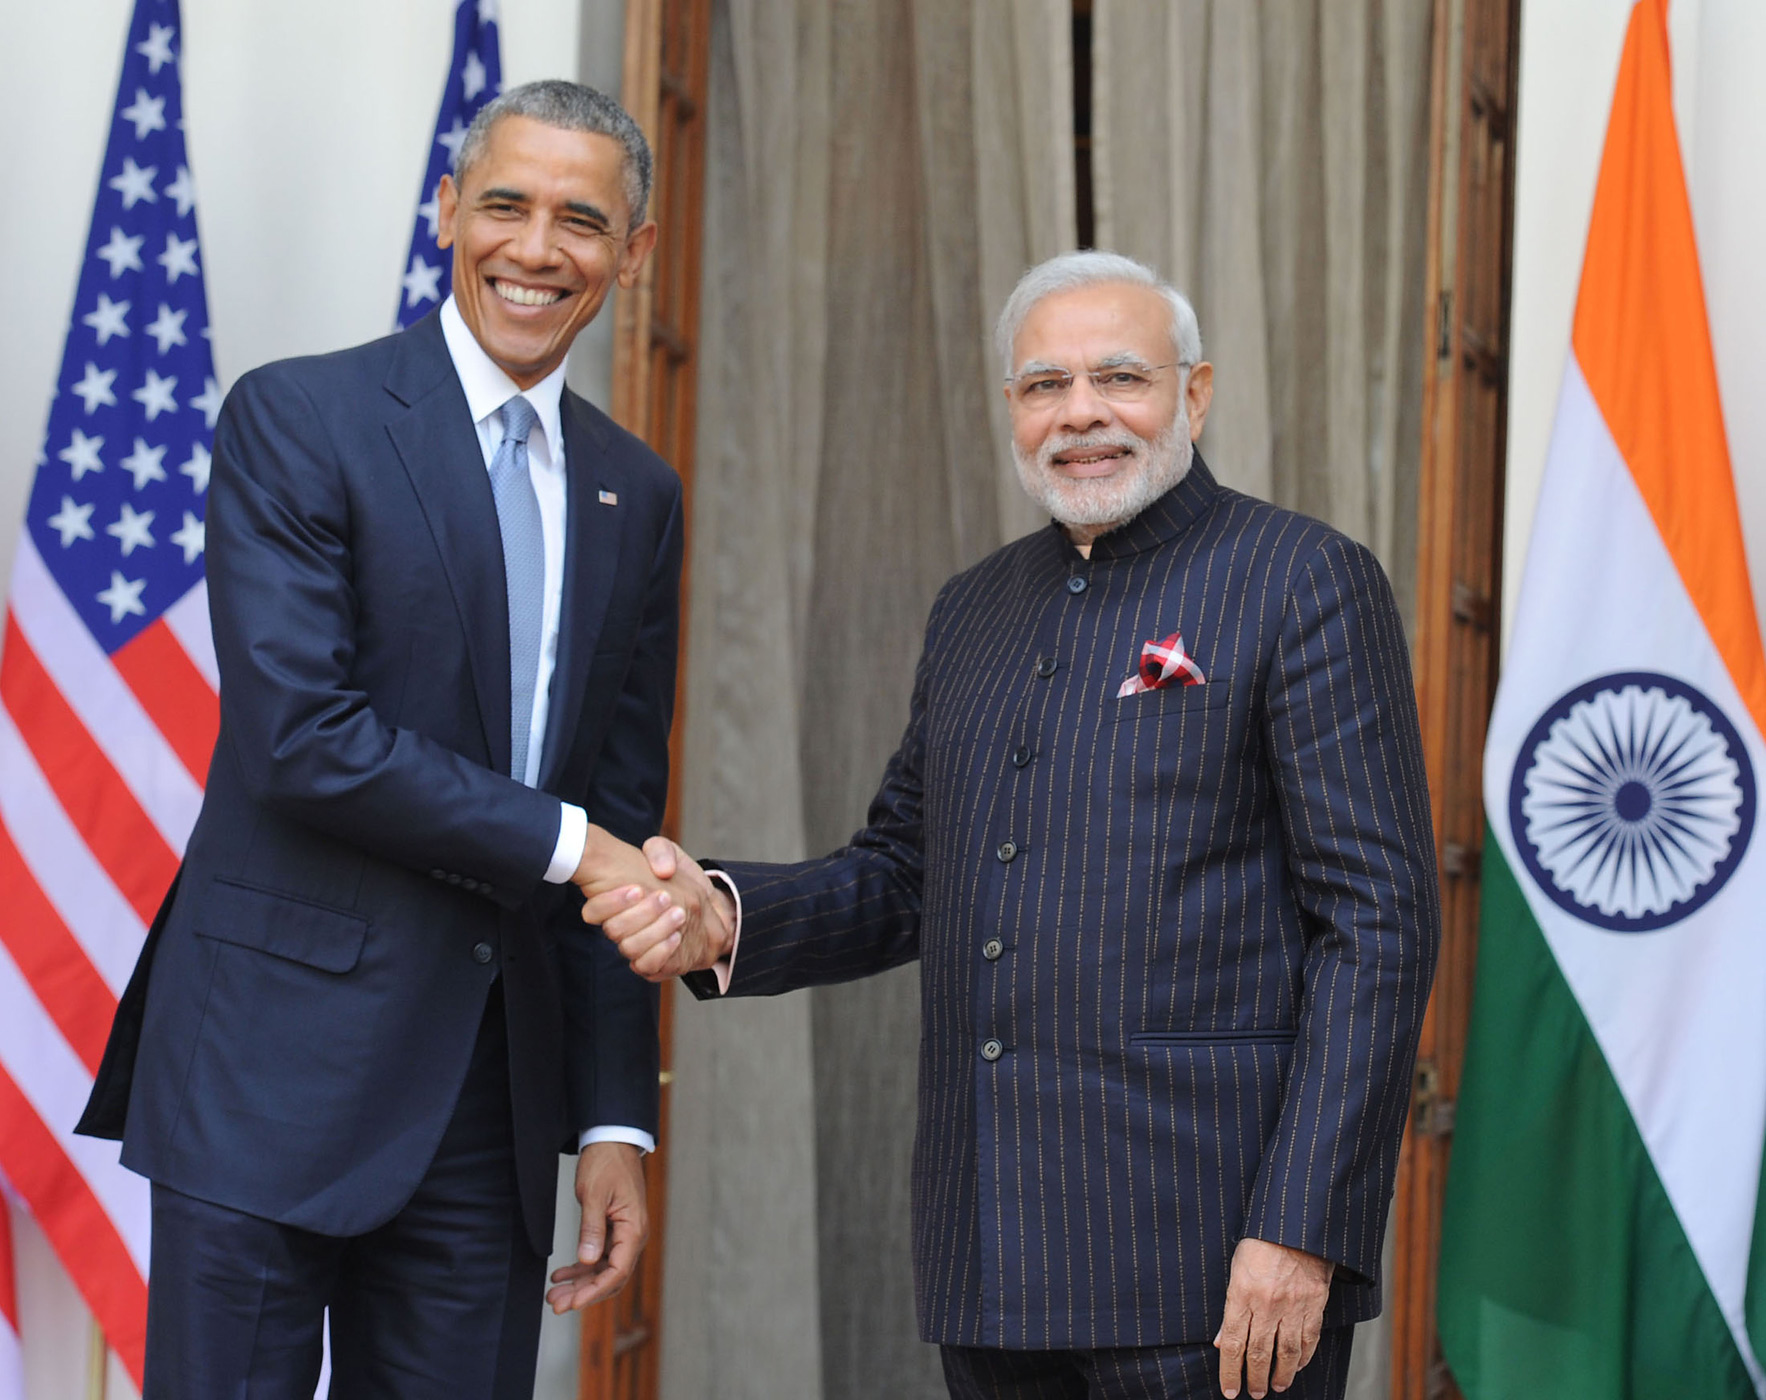 Indian Prime Minister Narendra Modi with President Barack Obama at Hyderabad House on Jan. 25, 2015 in New Delhi, India. (Prabhat Kumar Verma—Pacific Press/LightRocket/Getty Images)